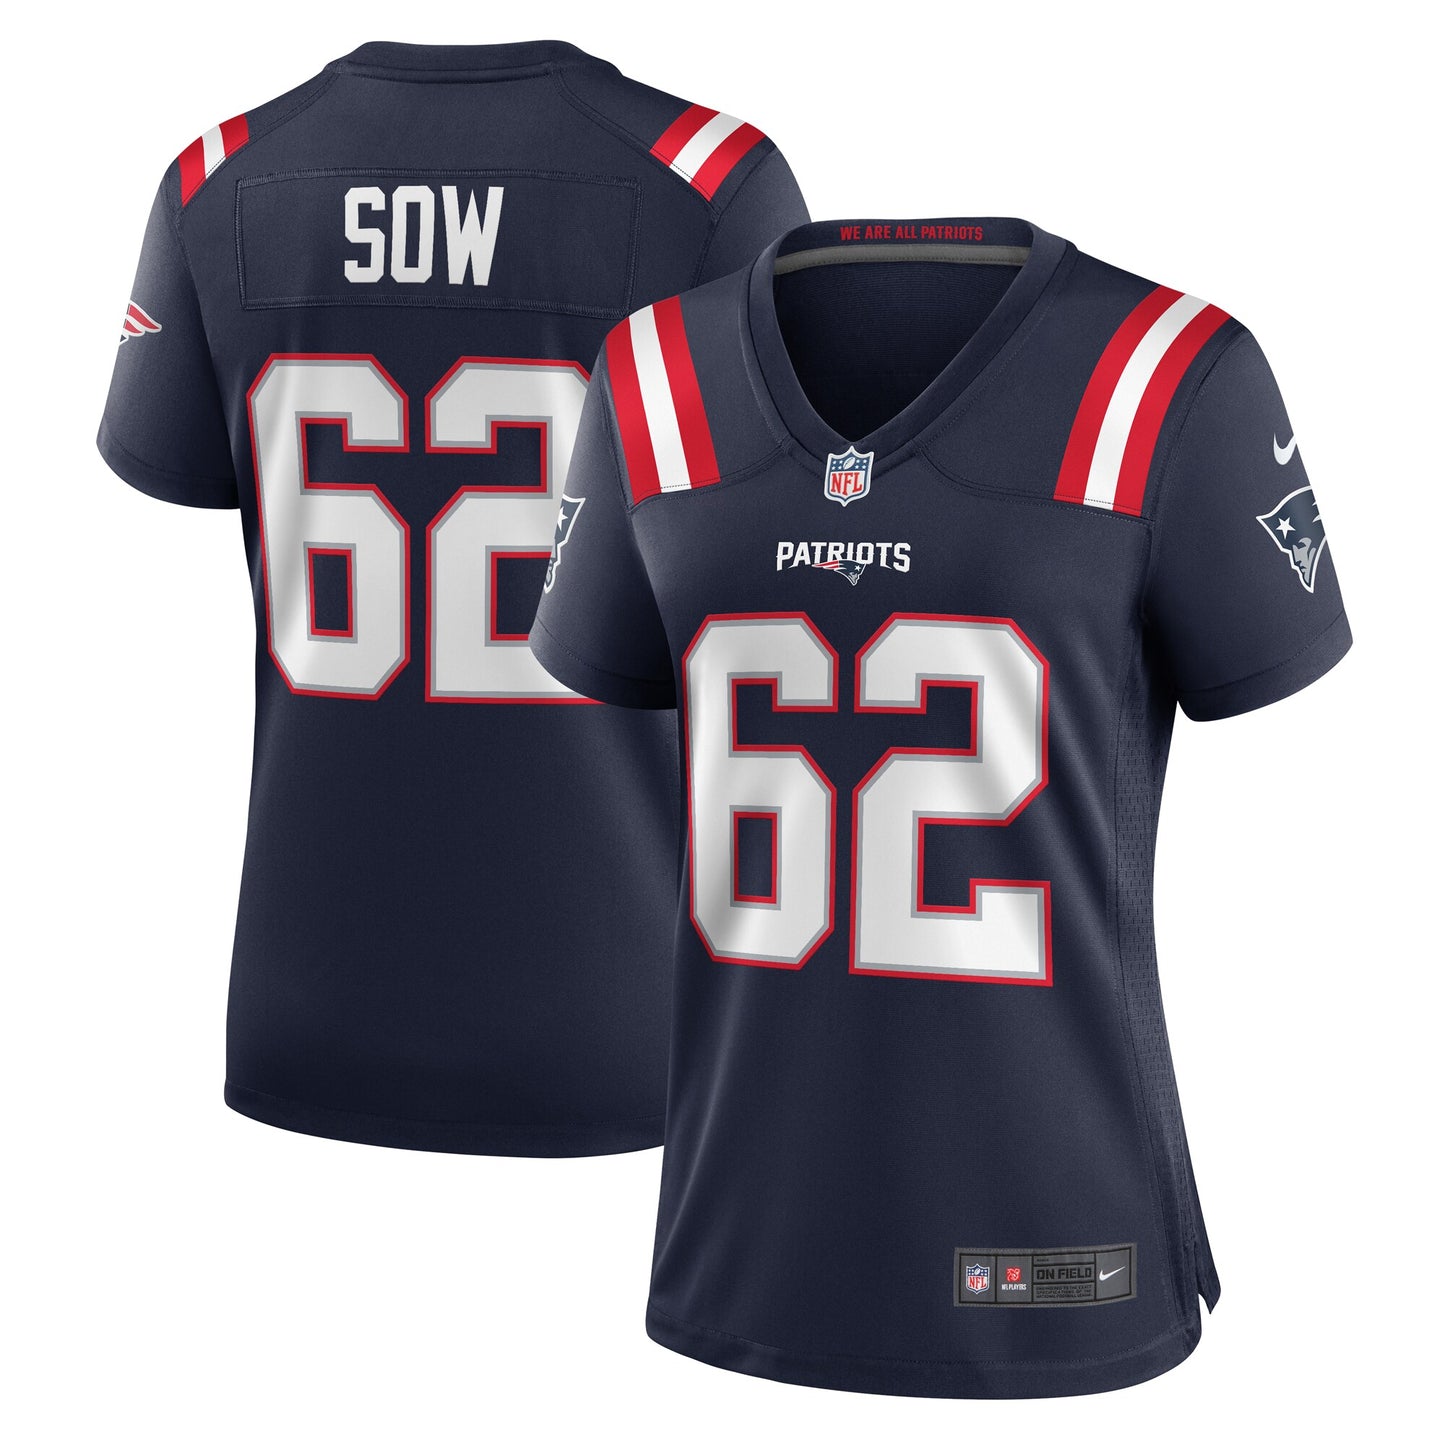 Sidy Sow New England Patriots Nike Women's Team Game Jersey -  Navy